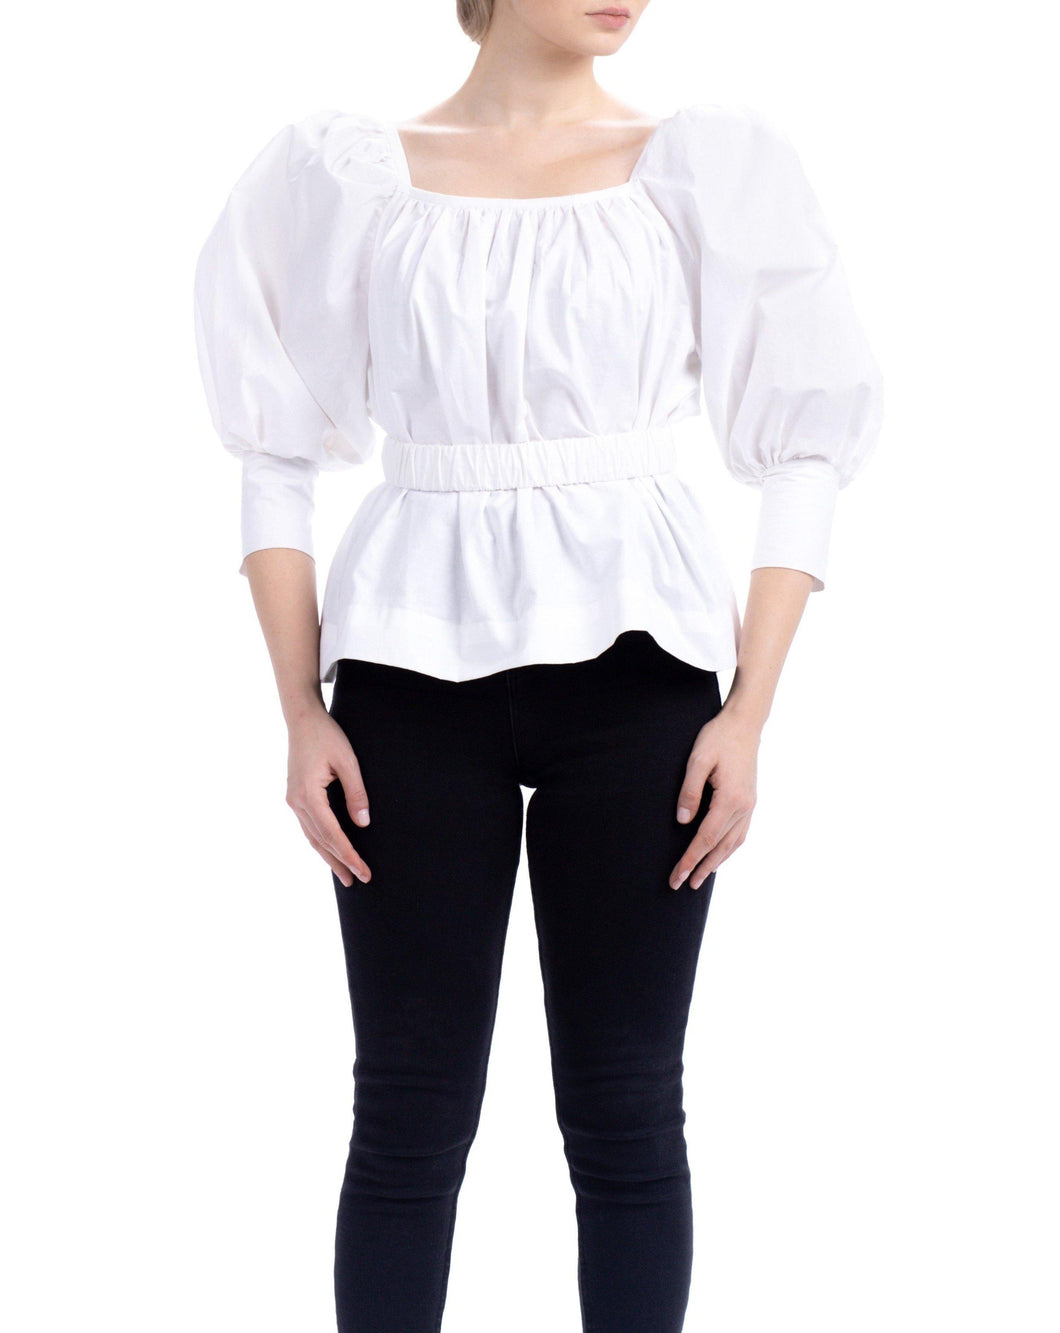 Amelia White Blouse by Abôvian, Product type - Top, Designed by Gabrielle1920